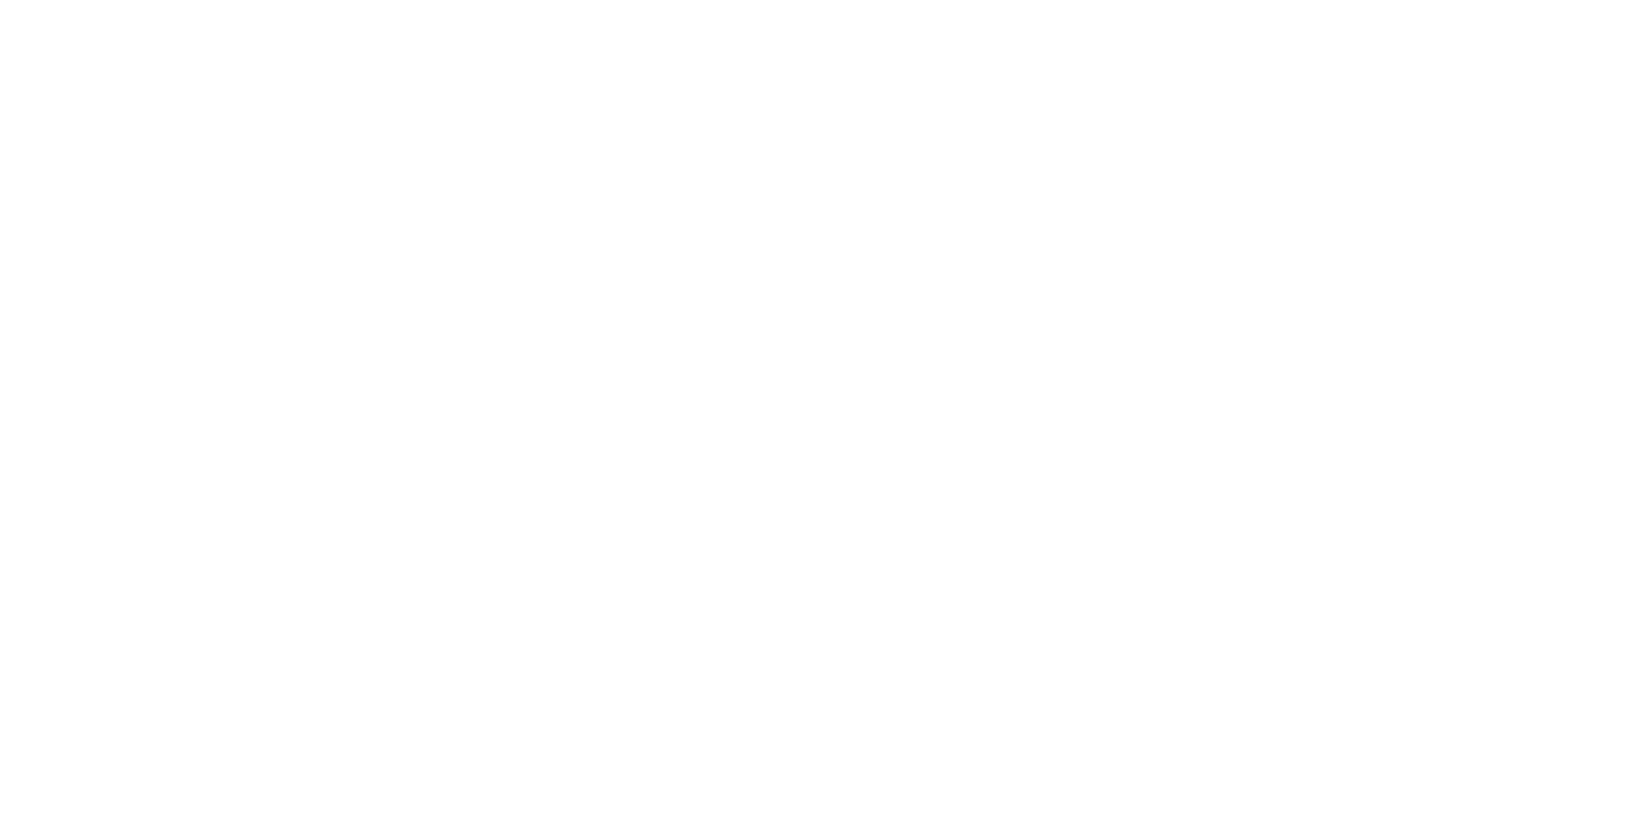 world map dotted